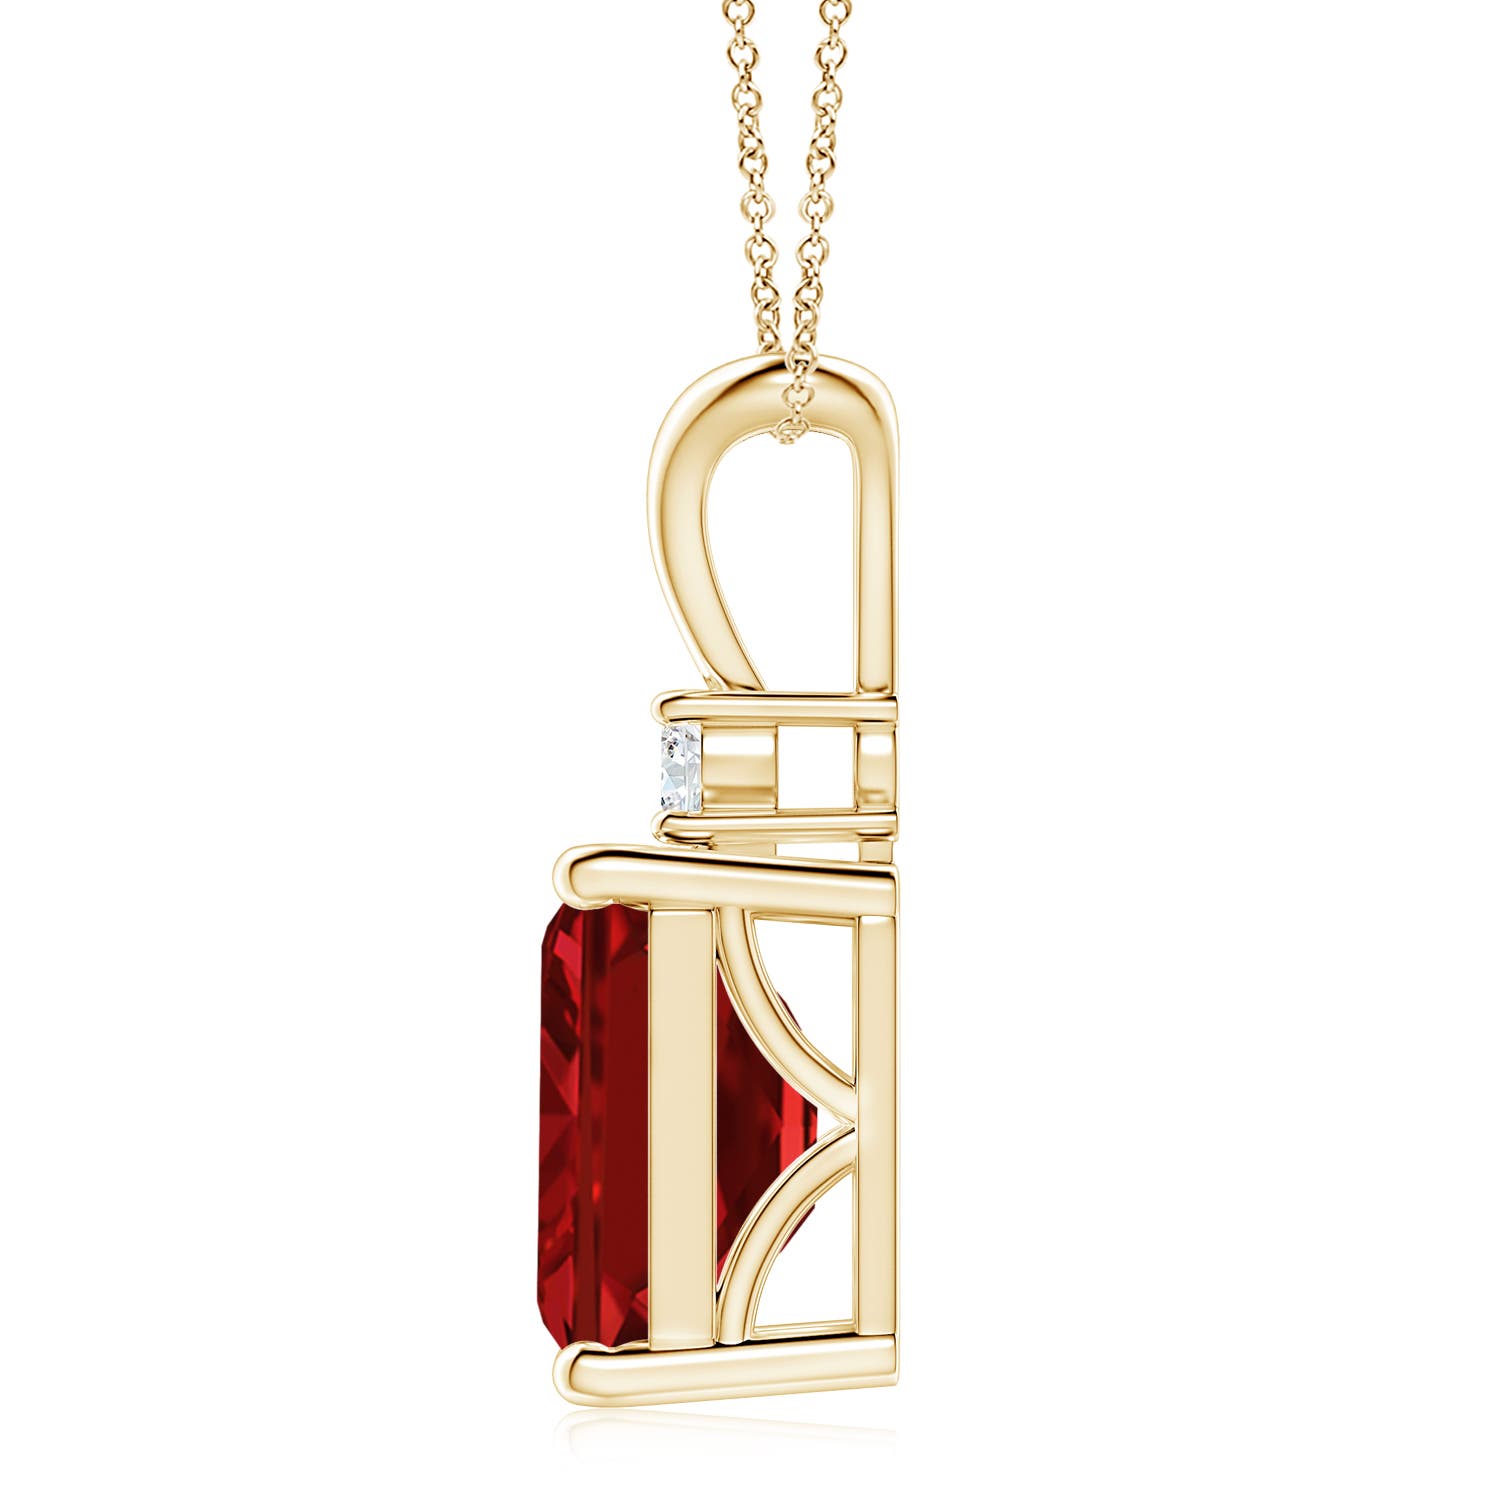 AAAA - Ruby / 6.41 CT / 14 KT Yellow Gold